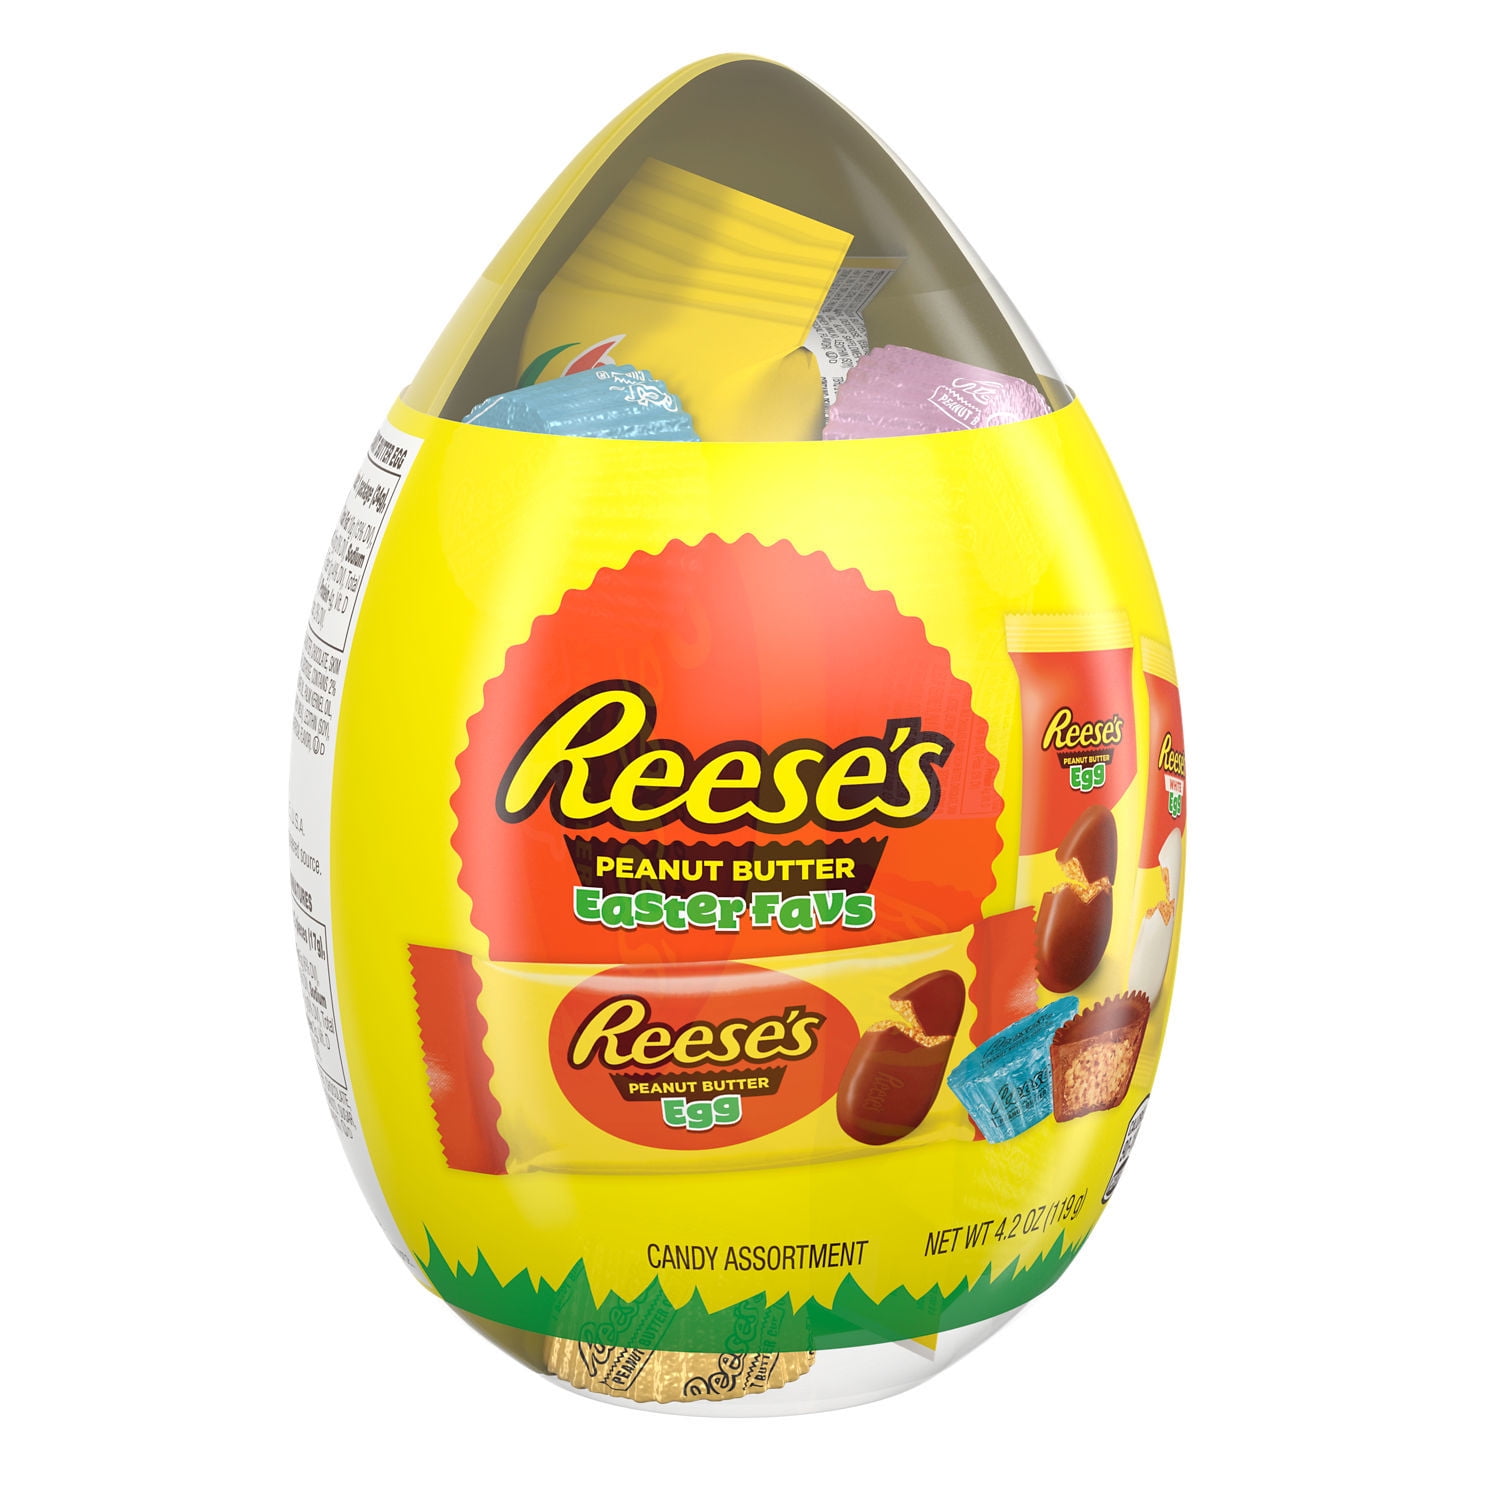 REESE'S, Assorted Milk Chocolate White Creme Peanut Butter Treats, Easter Candy, 4.2 oz, Plastic Egg